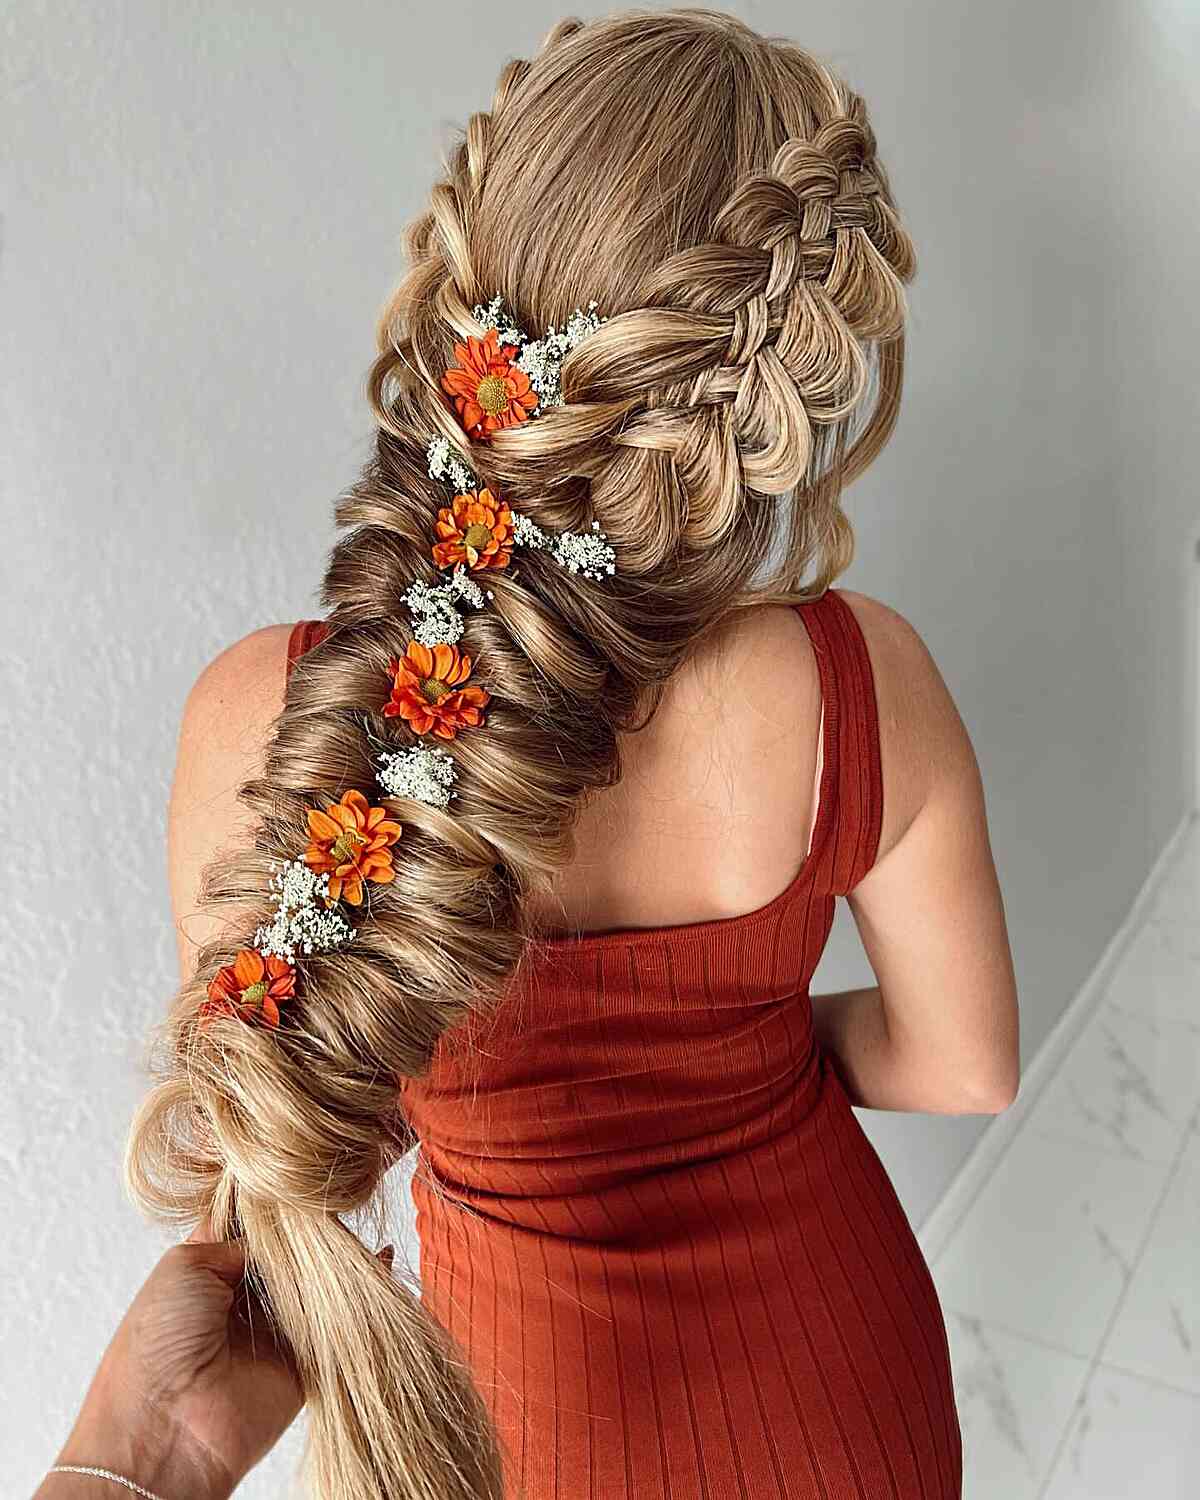 Very Fancy Hairstyle with braids and flowers